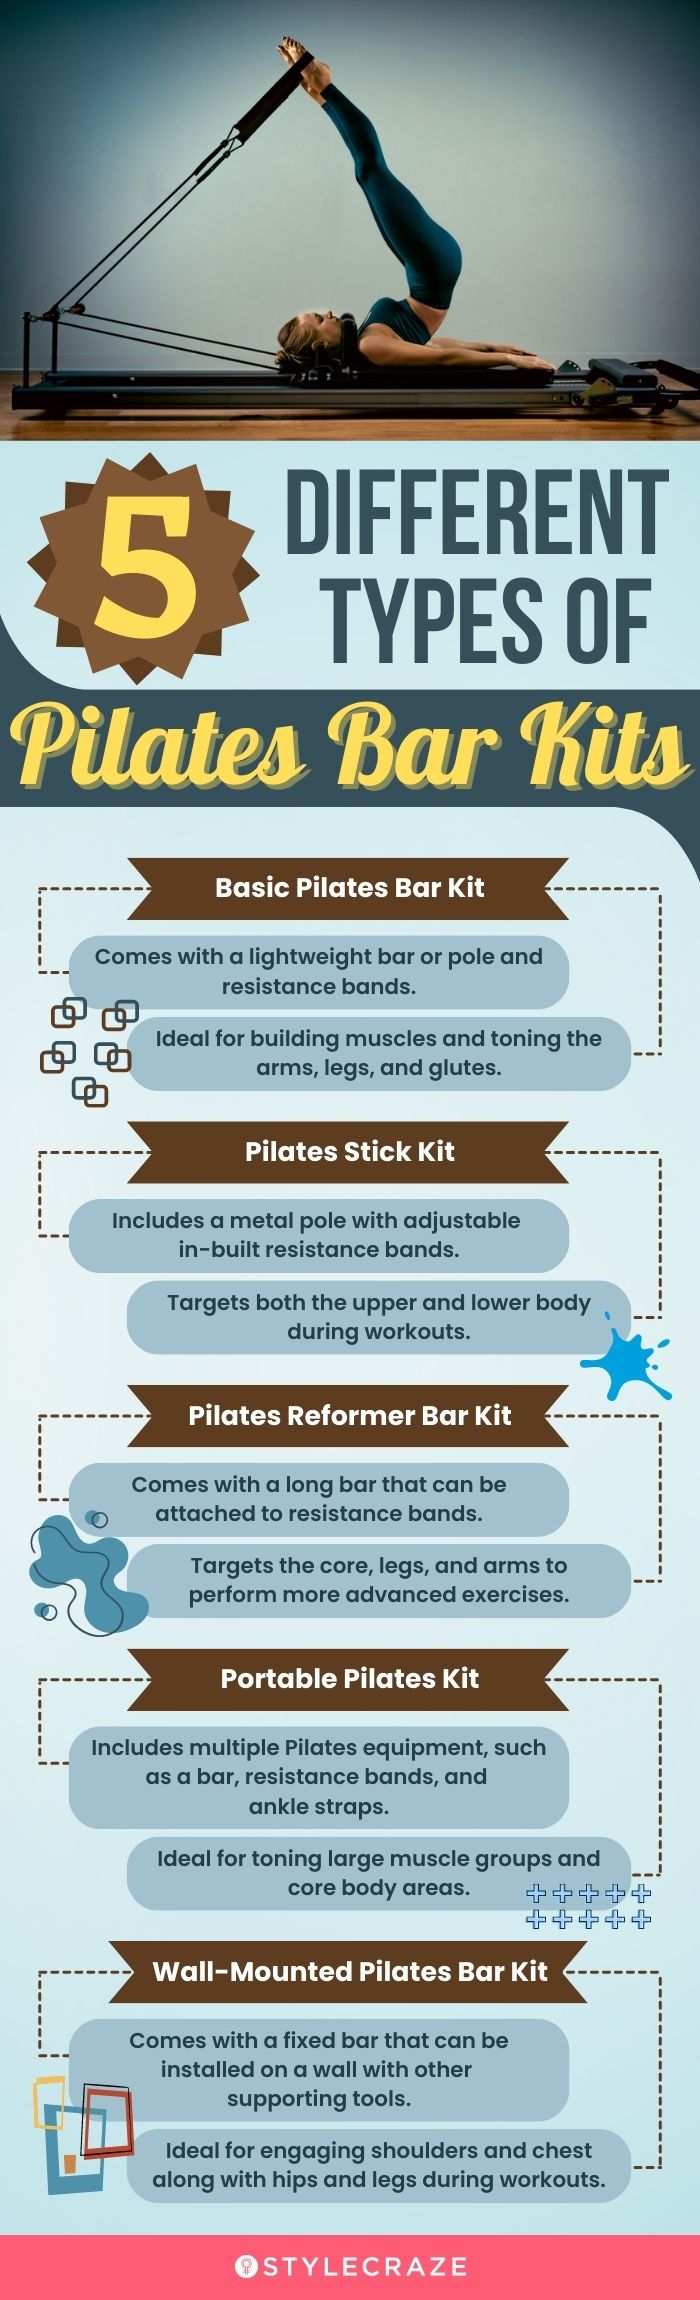 5 Different Types Of Pilates Ba (infographic)